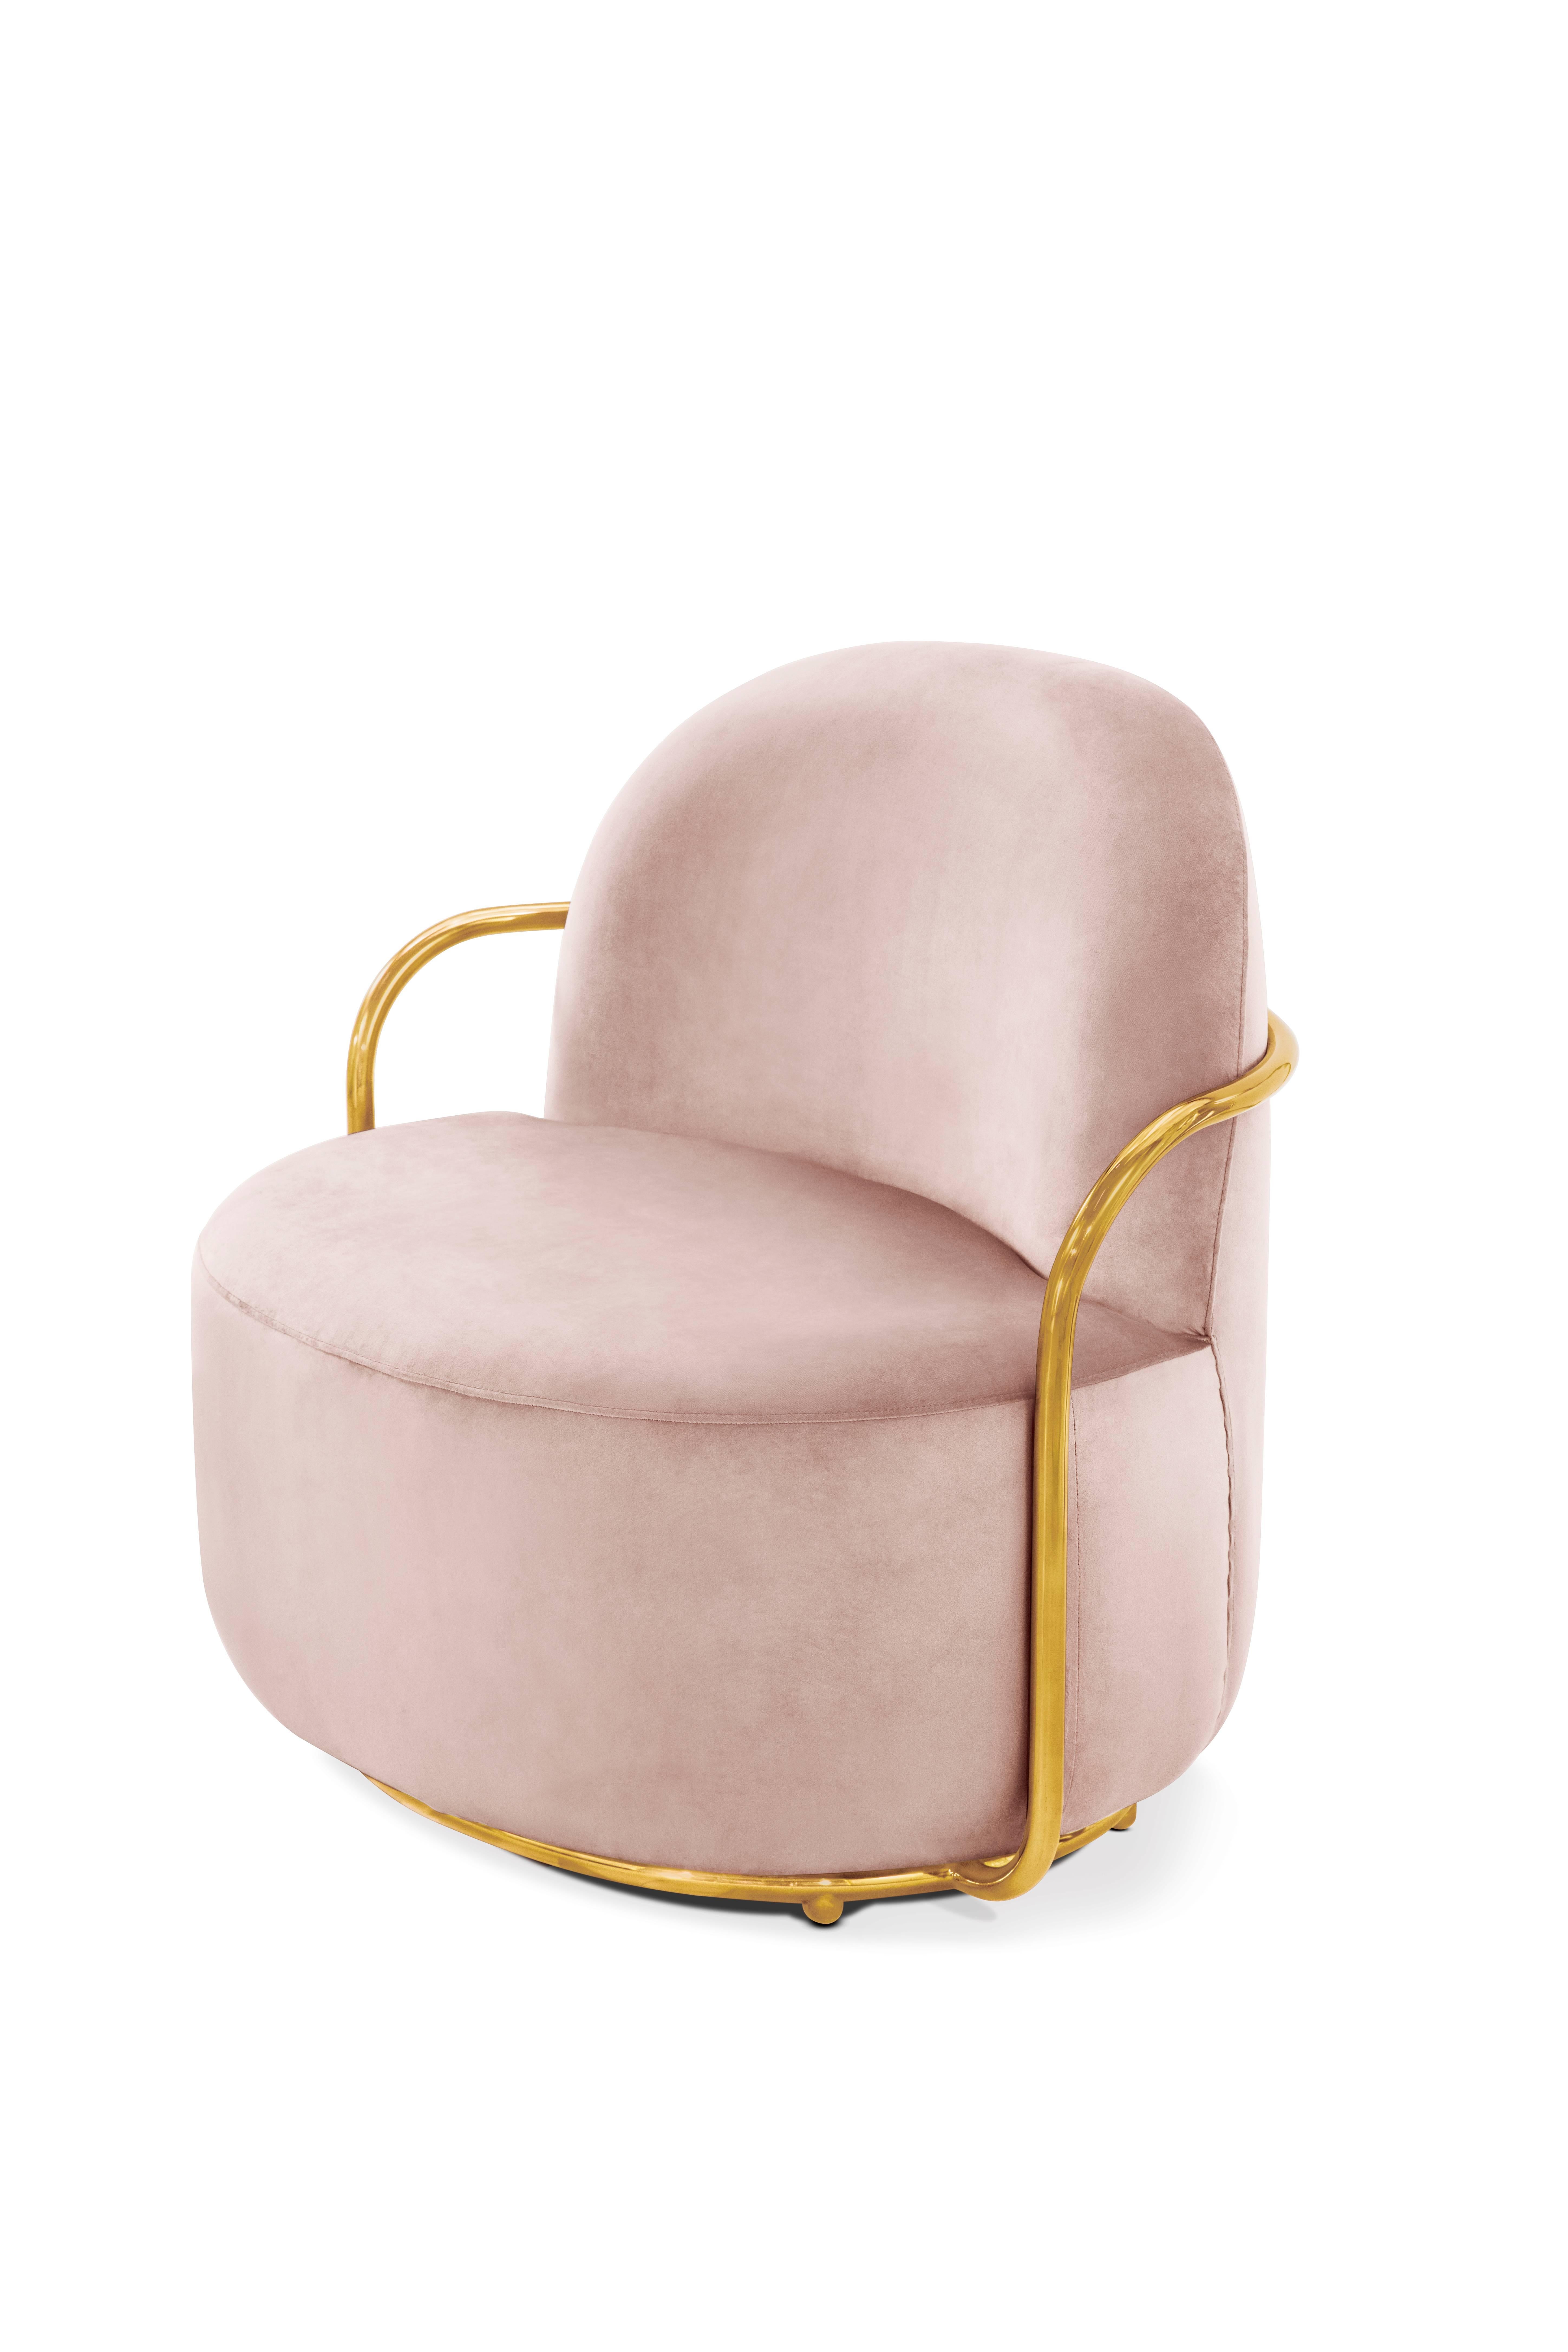 Orion lounge chair blush rose by Nika Zupanc for Scarlet Splendour.

The 88 constellations of the universe mysterious and magical, holding a promise to guide our destinies. Little wonder that they are the muse for the 88 Secrets, Nika Zupanc’s